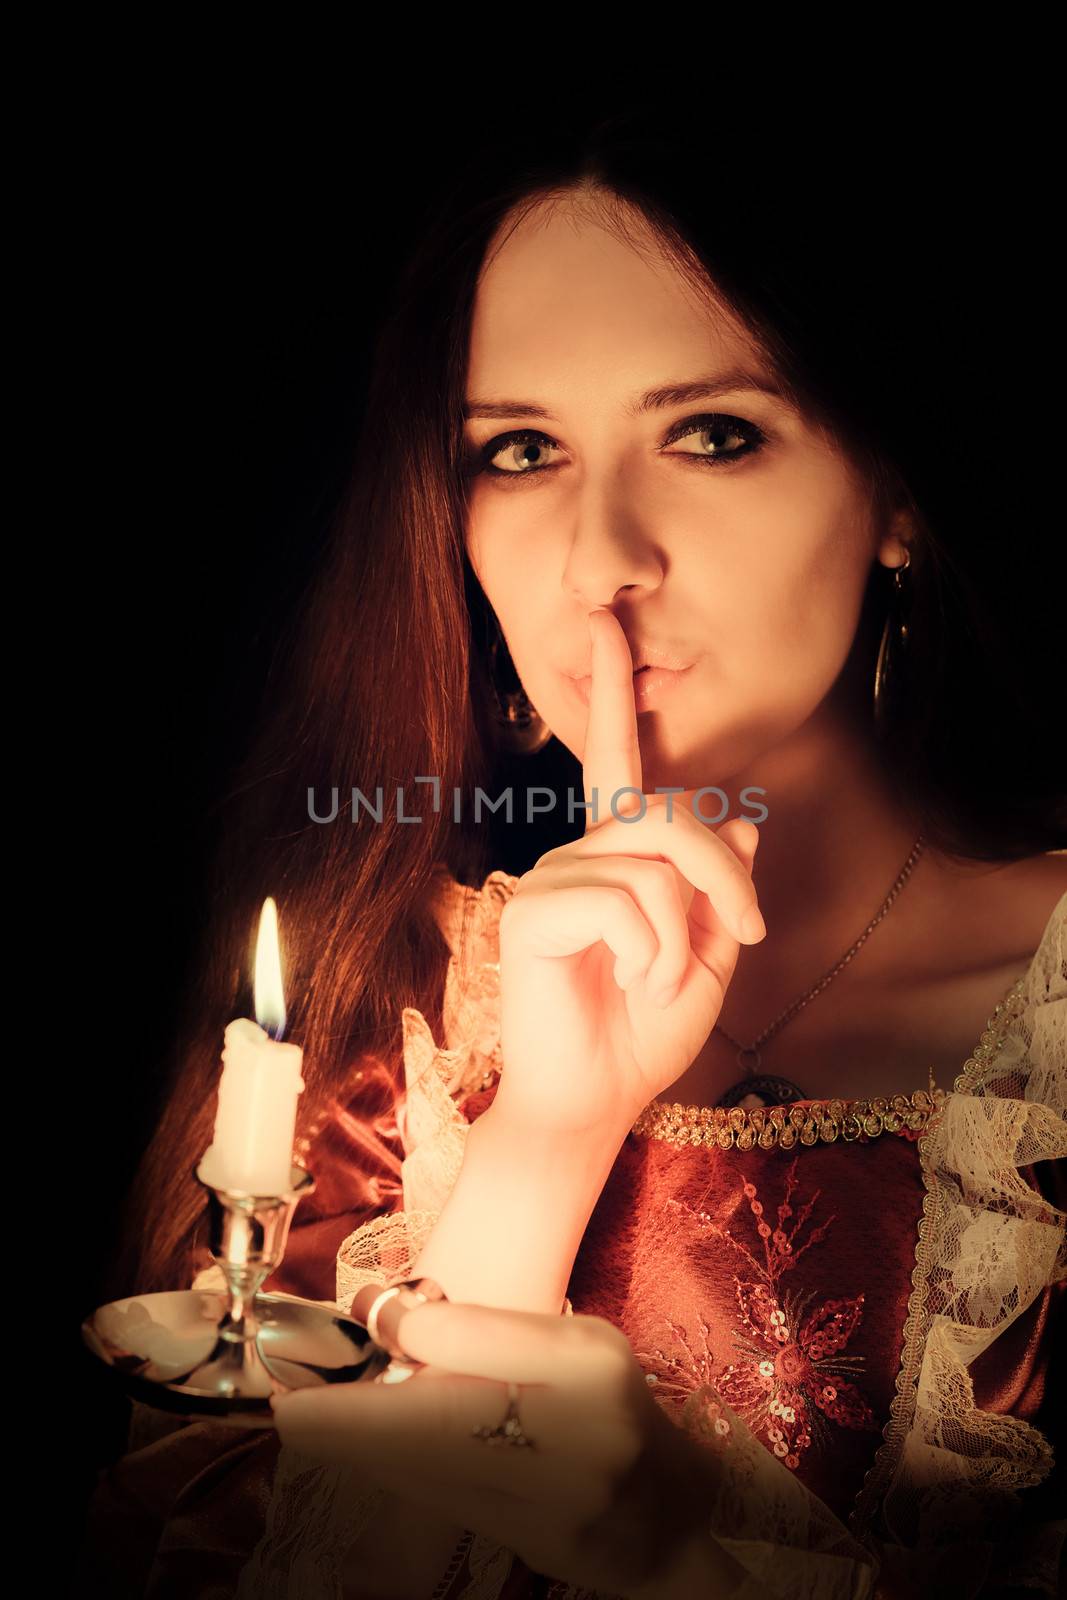 Girl holding a candle in a vintage dress.